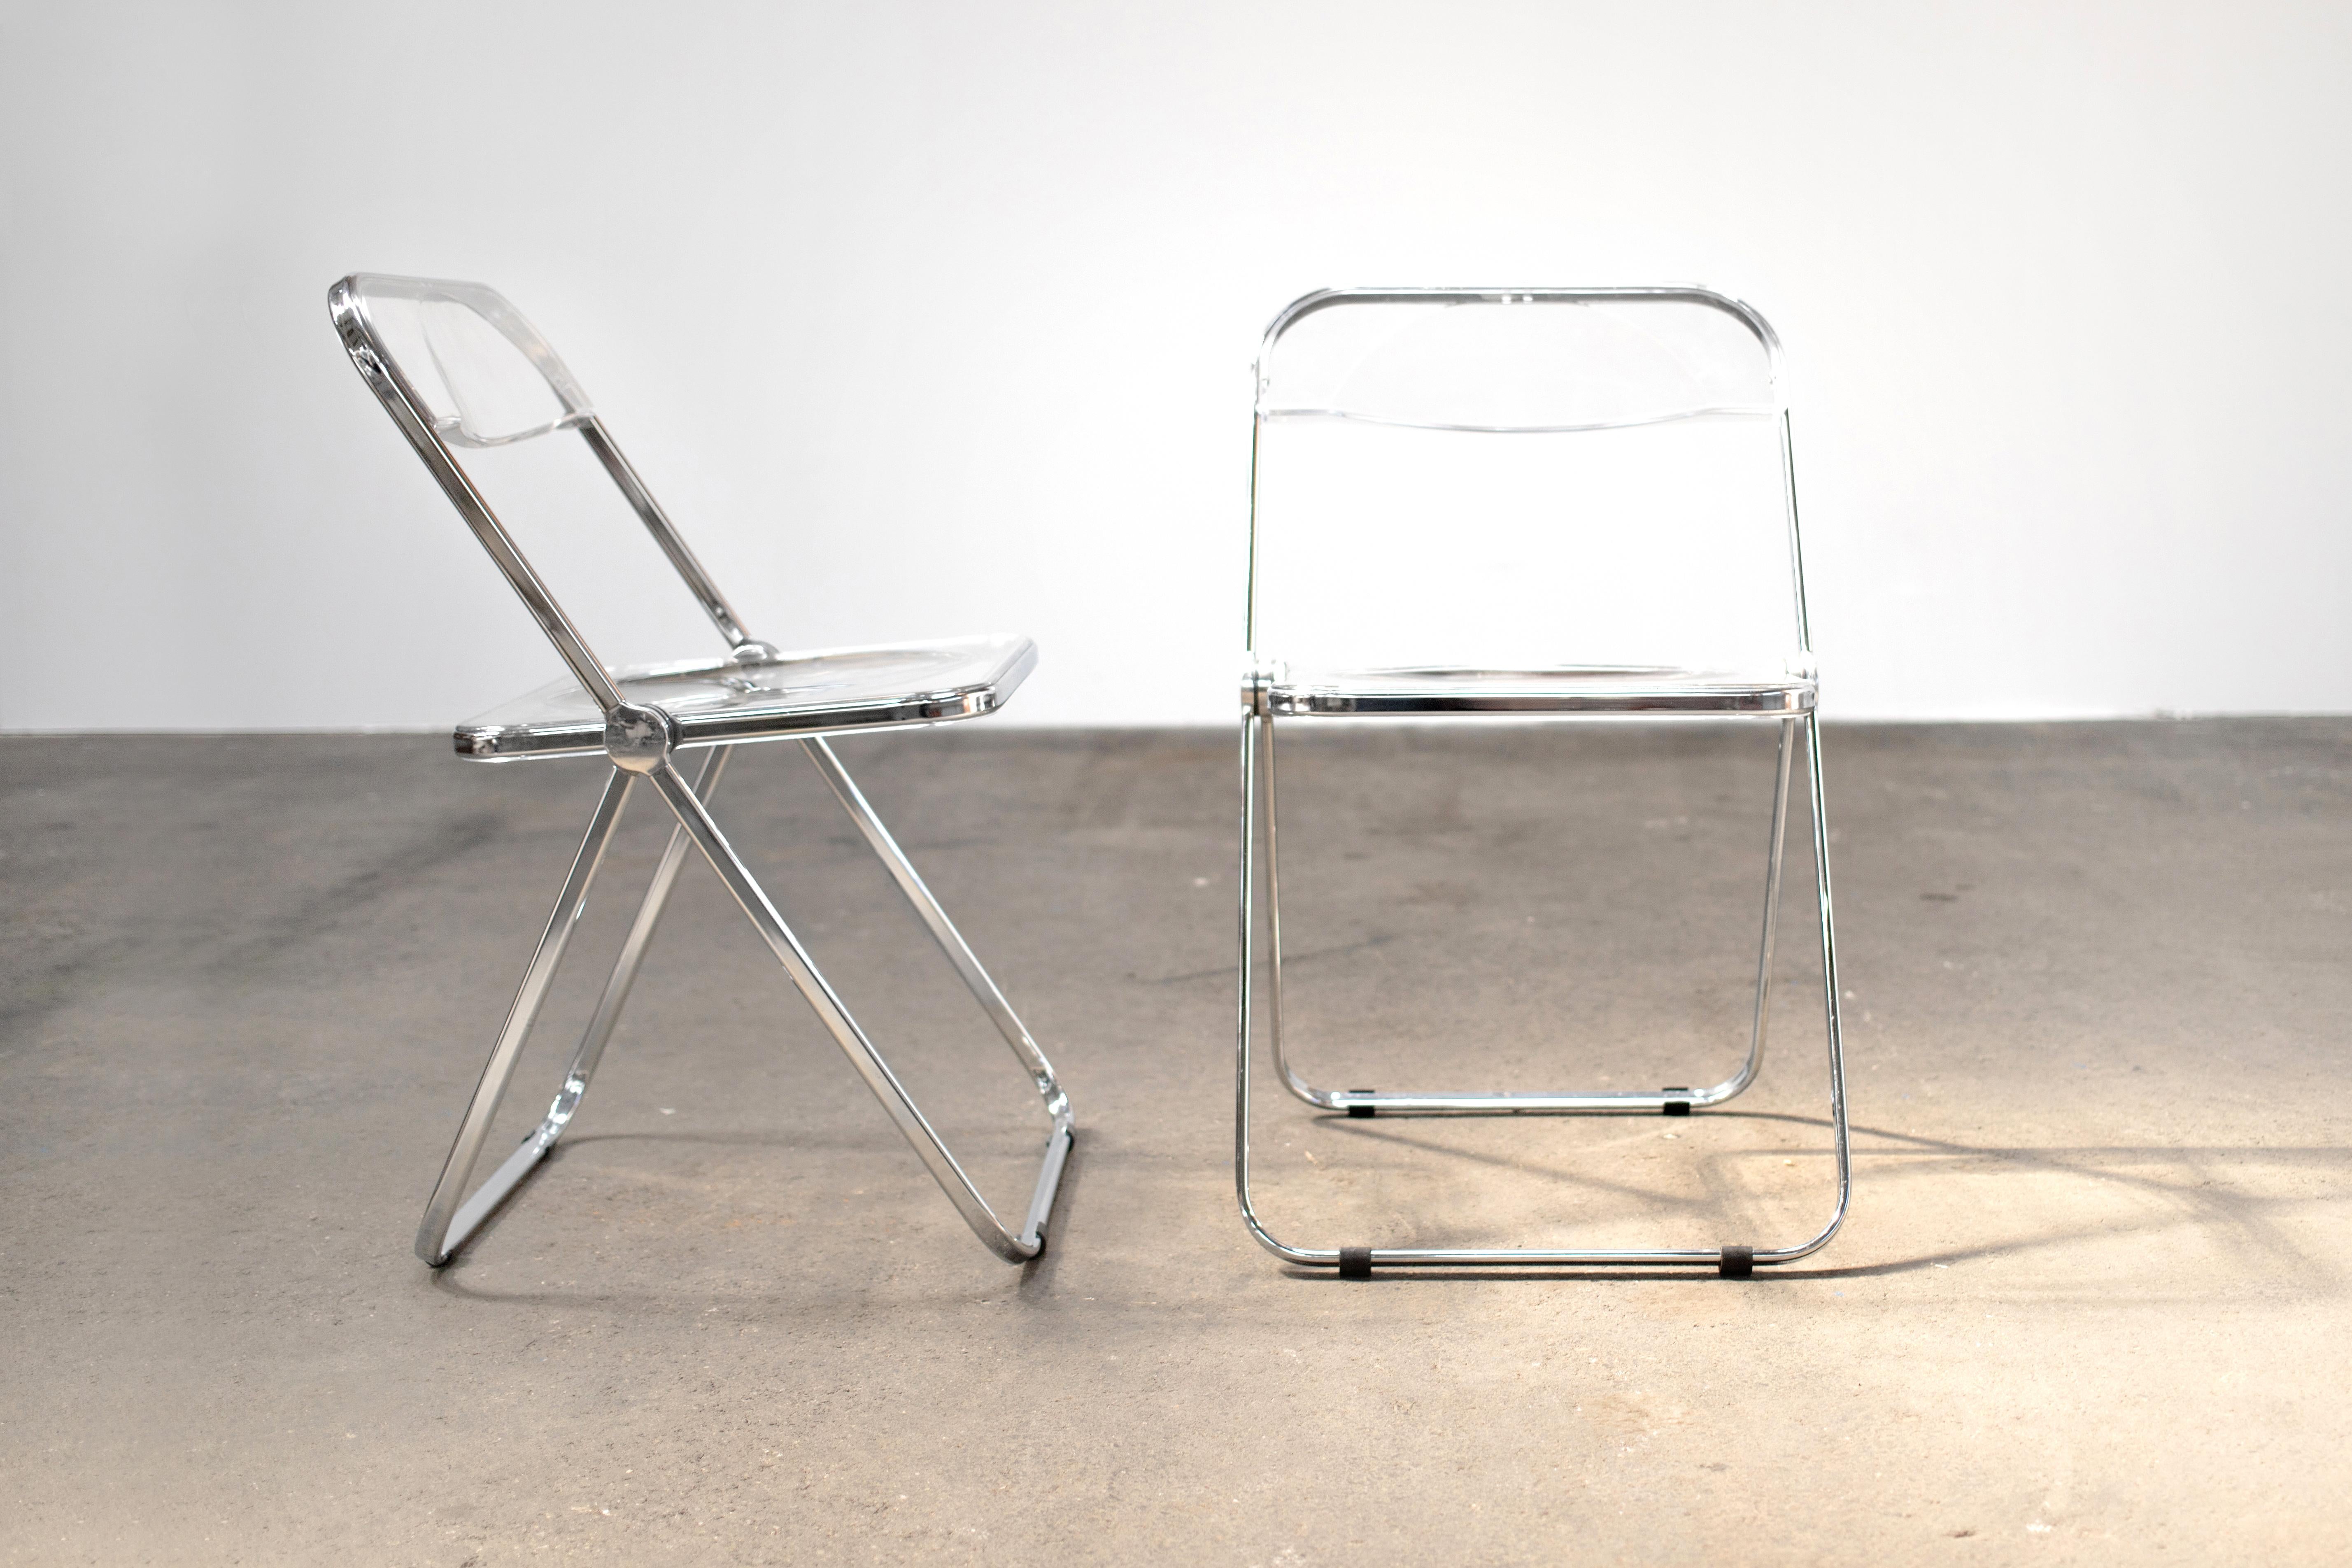 Superbly preserved pair of Space Age chrome and transparent lucite folding chairs designed by Giancarlo Piretti for Castelli, Italy. 

With steel frame, seat and back in clear lucite, it represents the realization of “democratic design” and is